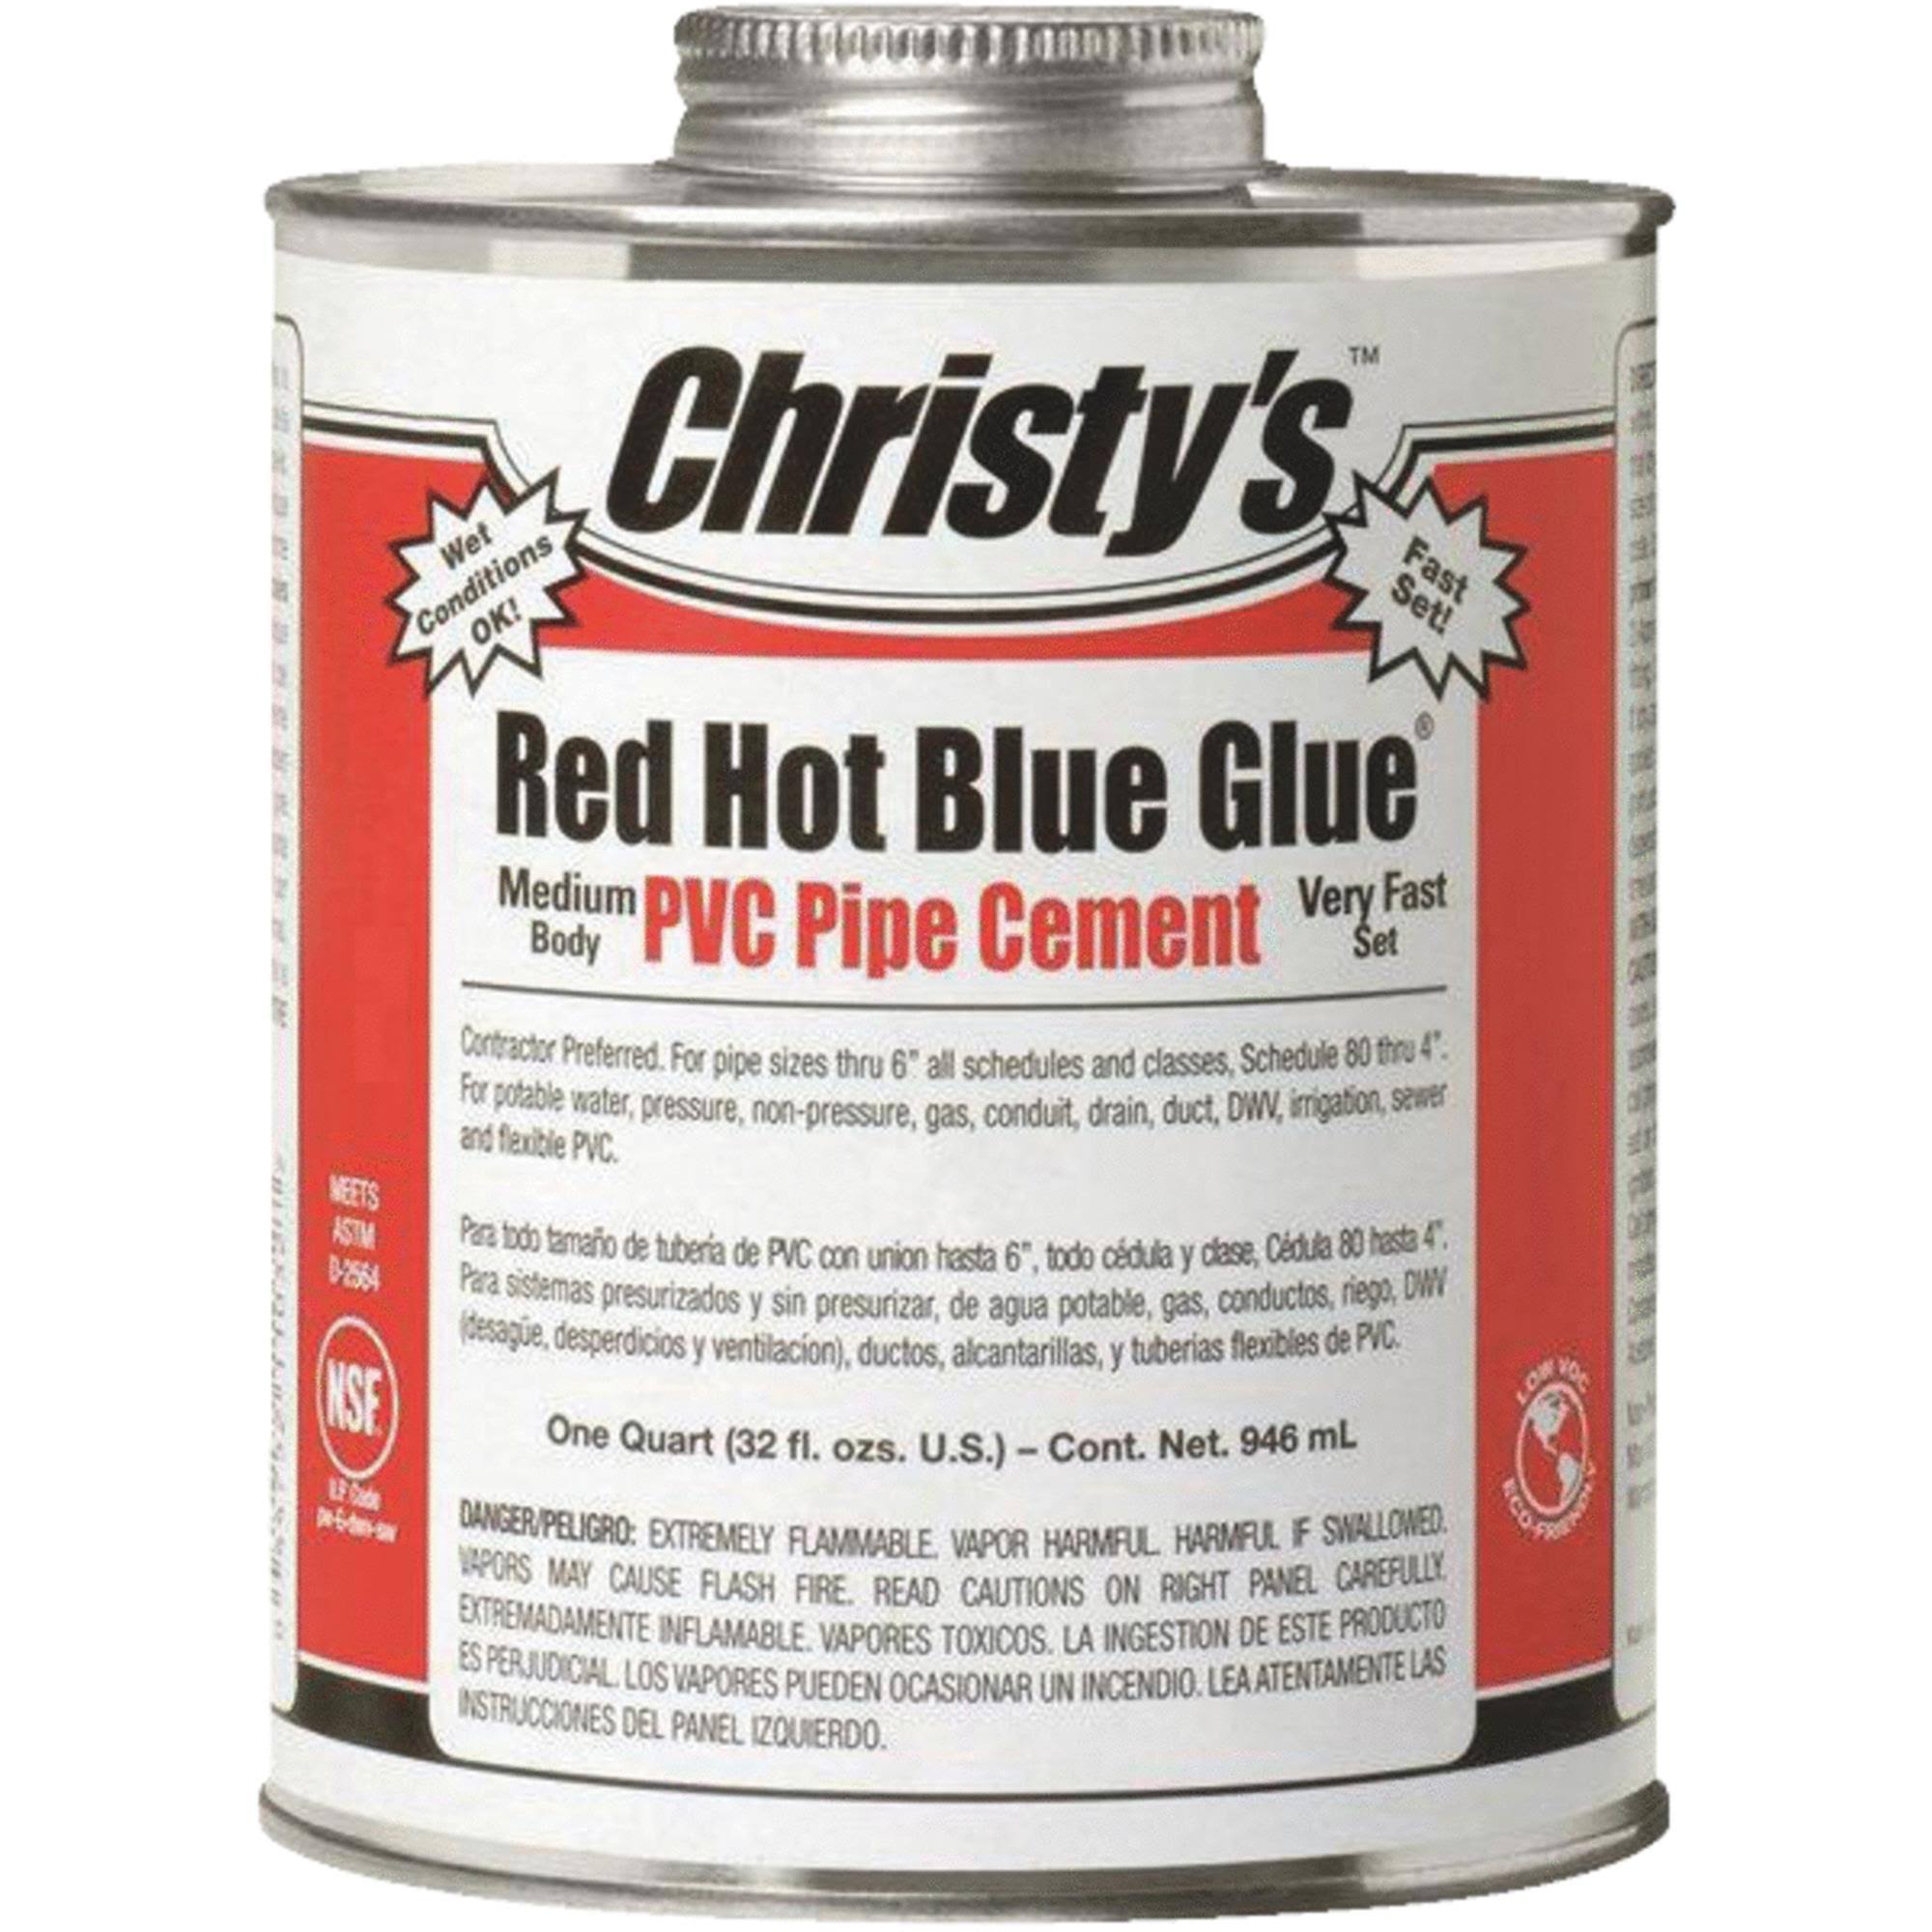 Christy's Low Voc Red Hot Blue Glue Pvc Pipe Cement - 32oz